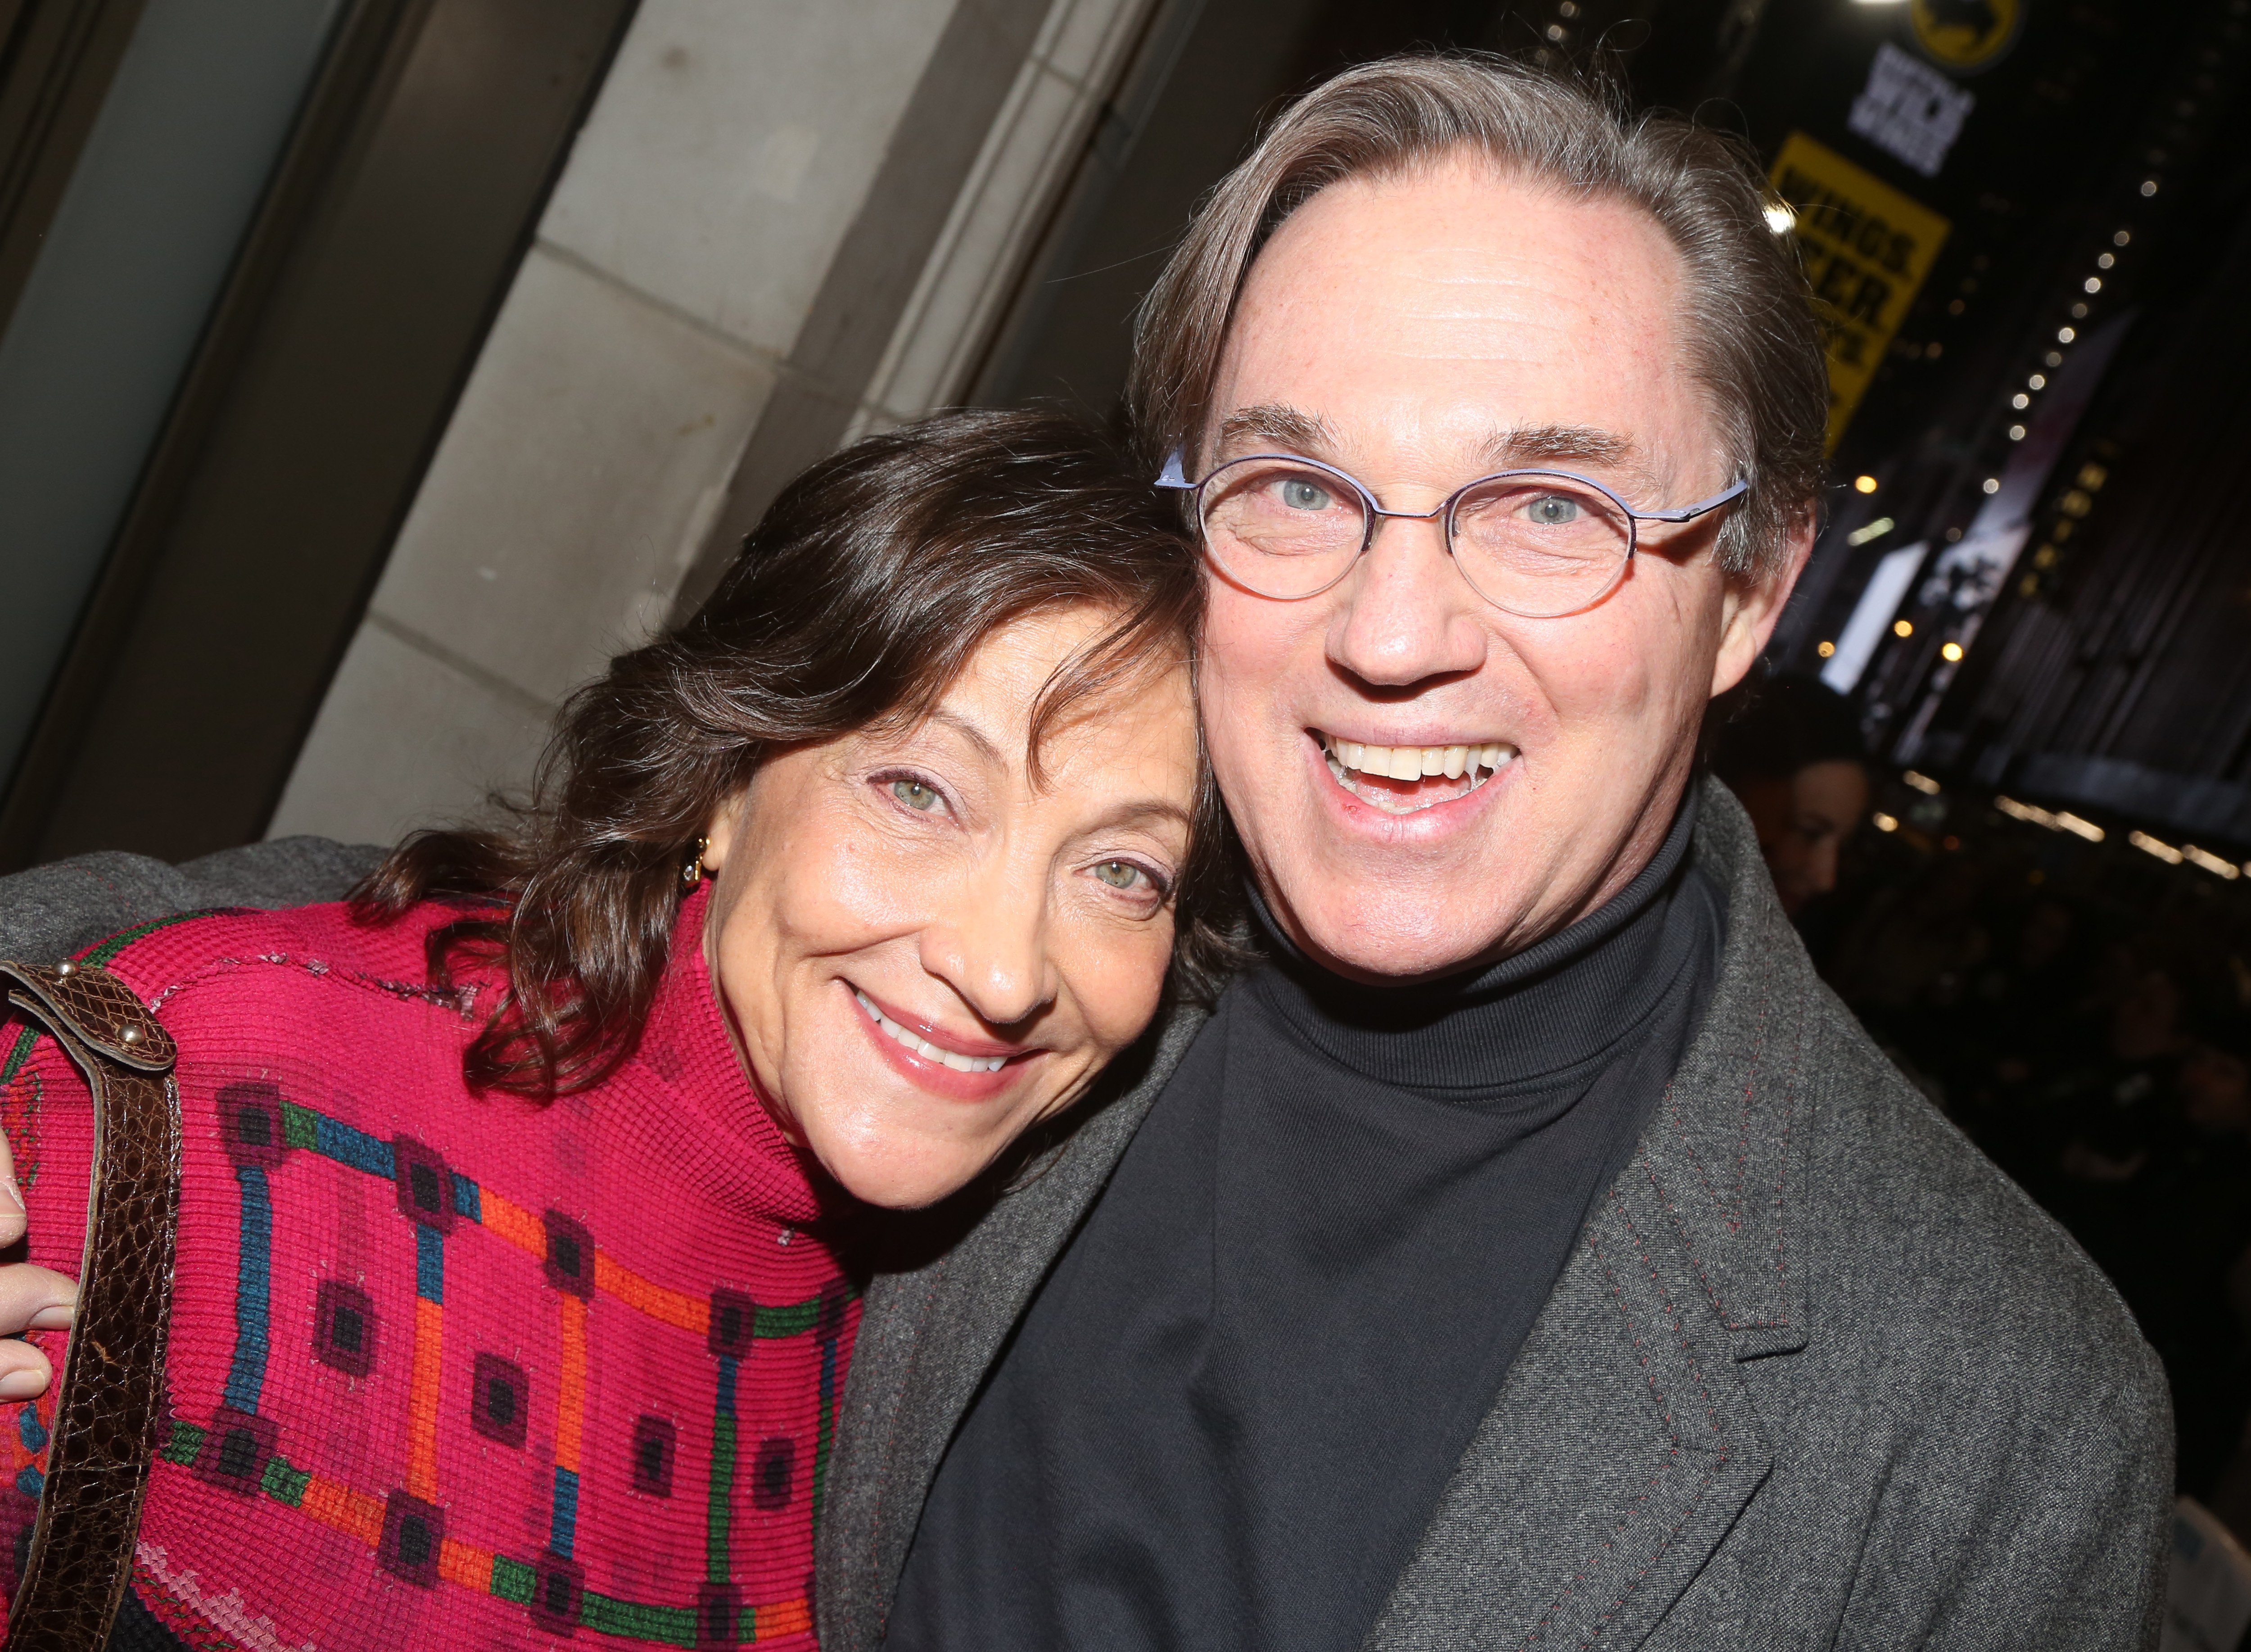 Georgiana Bischoff and husband Richard Thomas pose at the opening night of the new play "My Name Is Lucy Barton" on Broadway at The Samuel J. Friedman Theatre on January 15, 2020 in New York City | Source: Getty Images